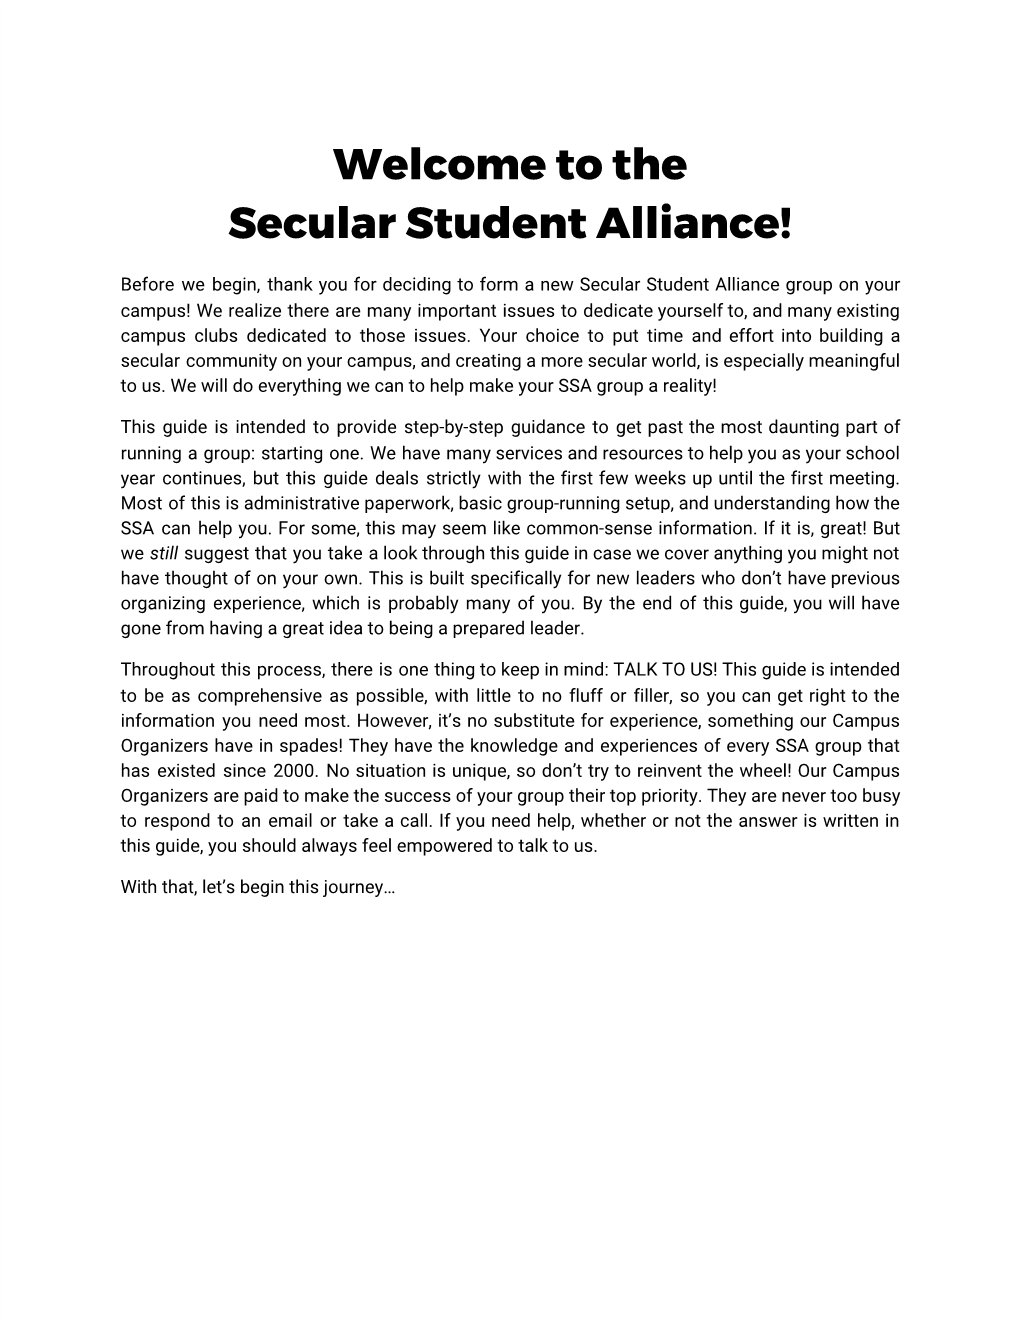 Welcome to the Secular Student Alliance!